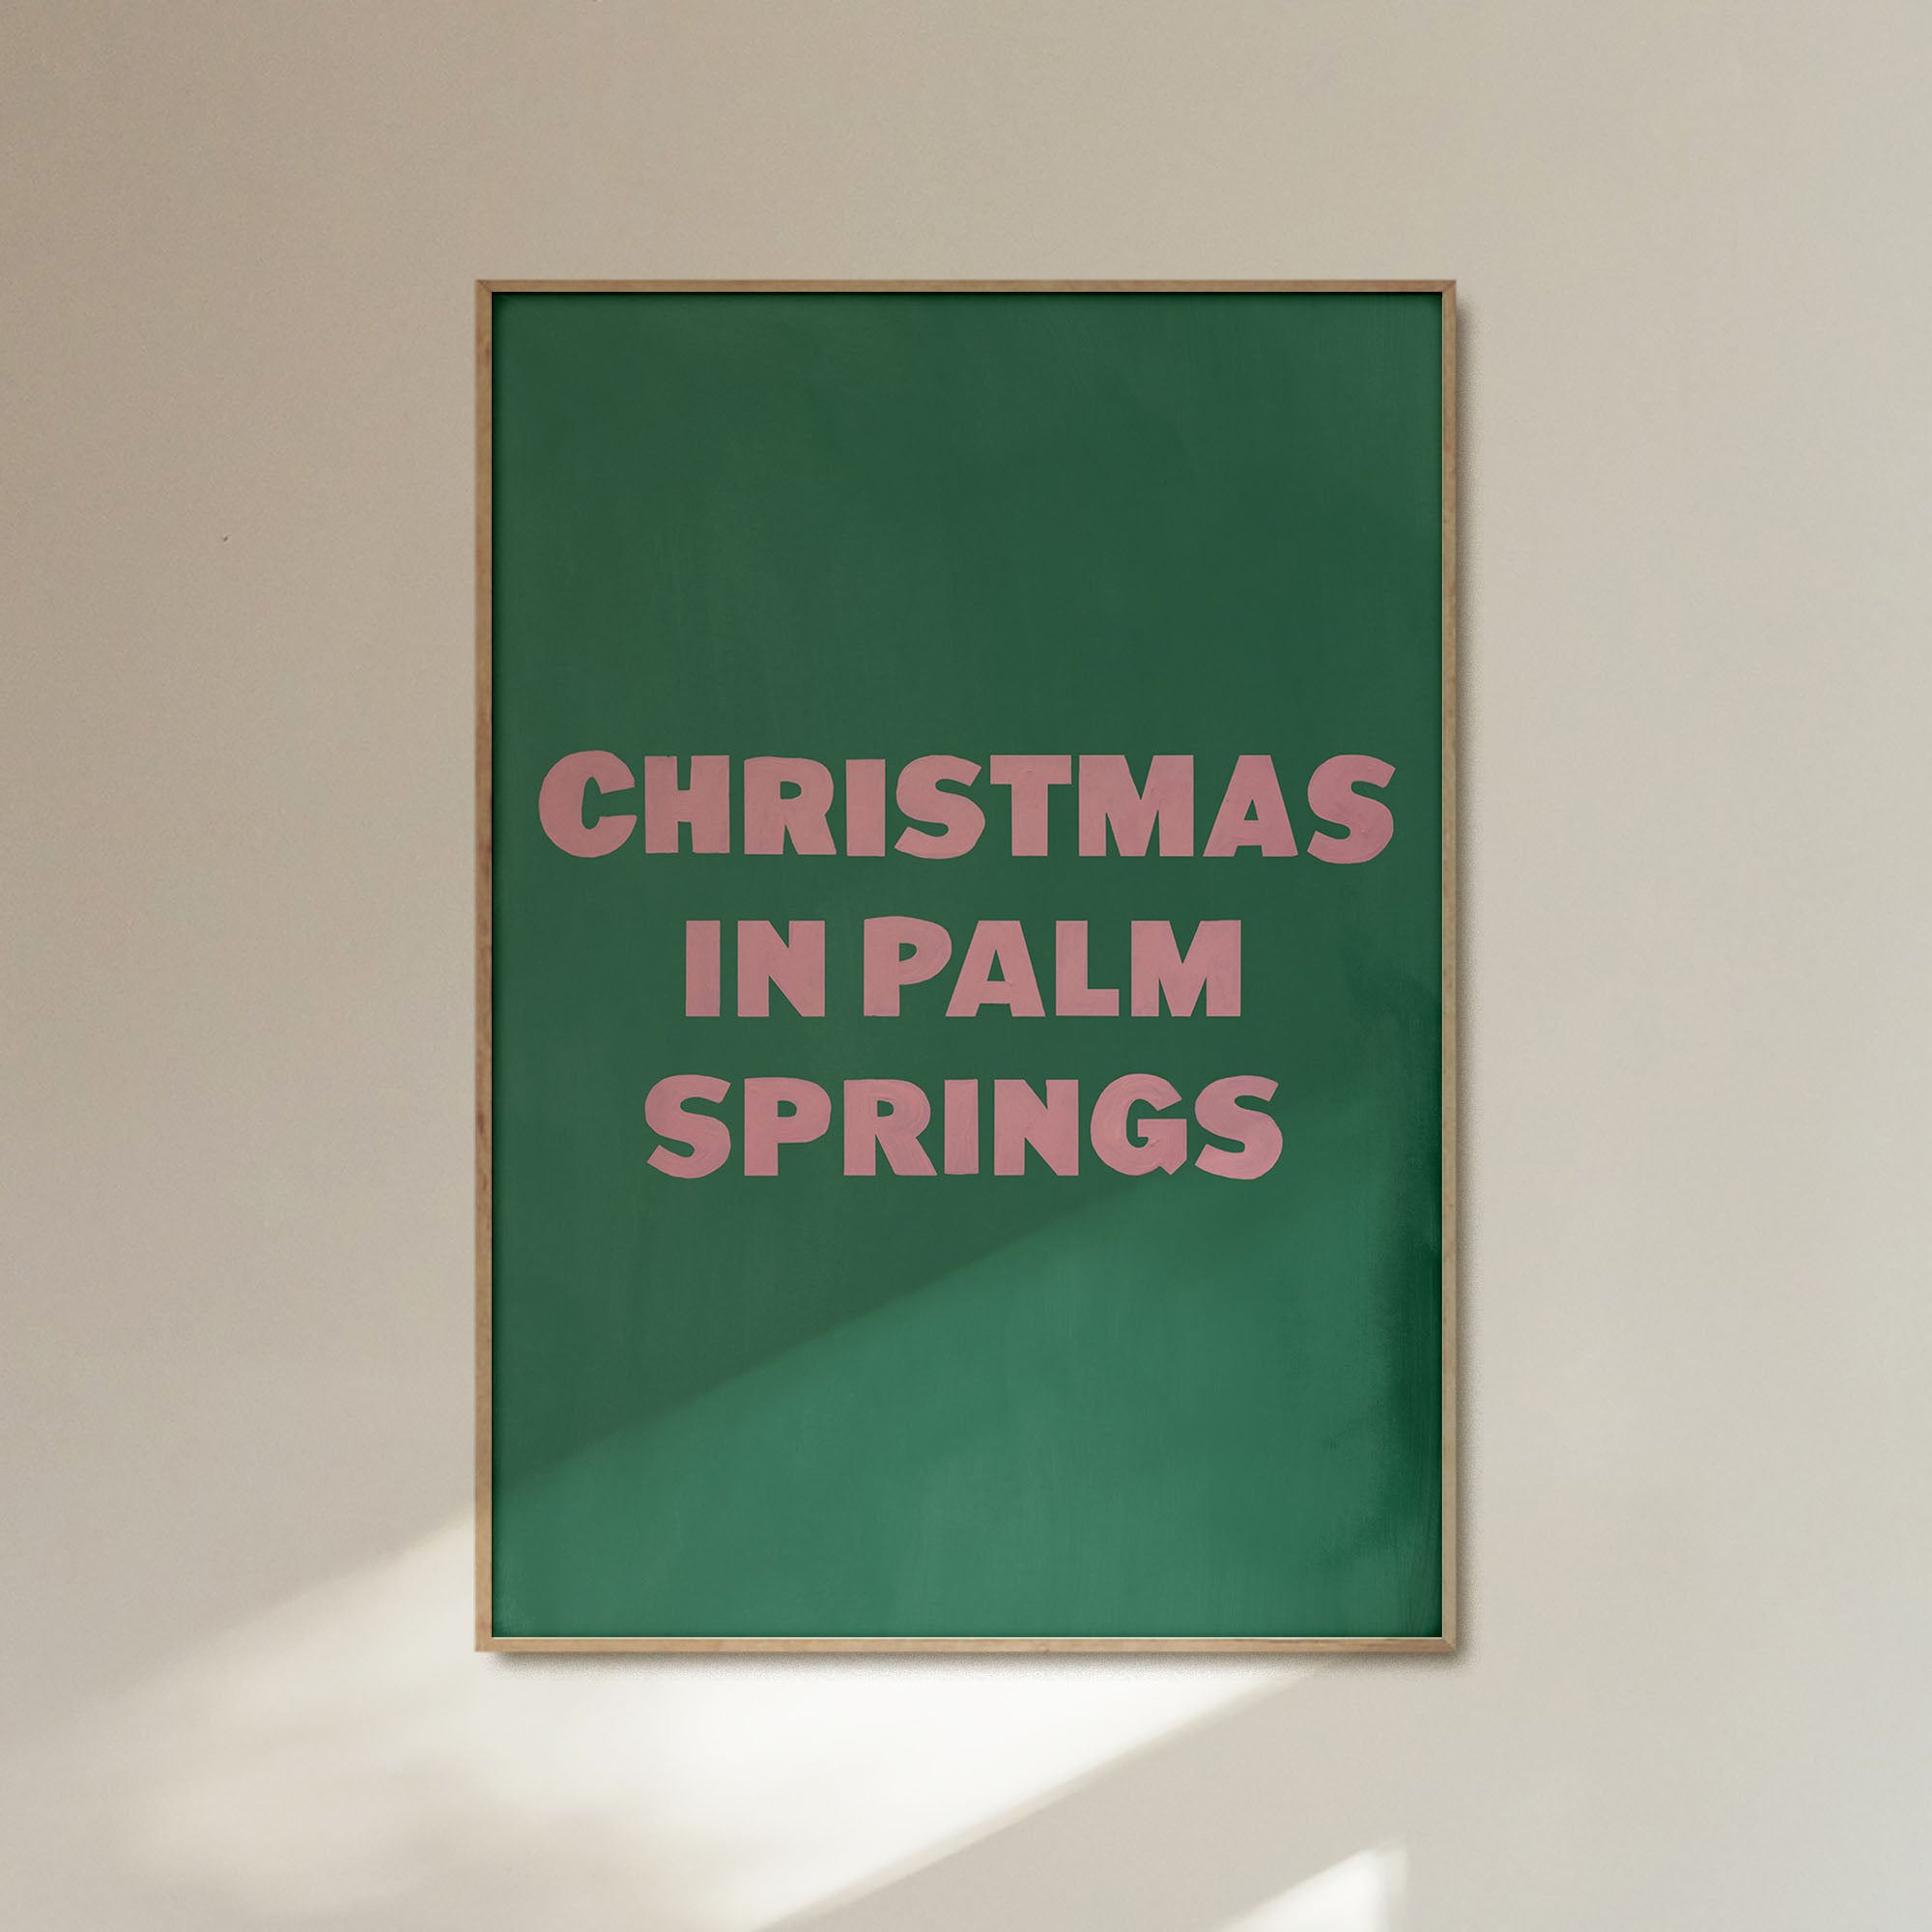 Christmas in Palm Springs